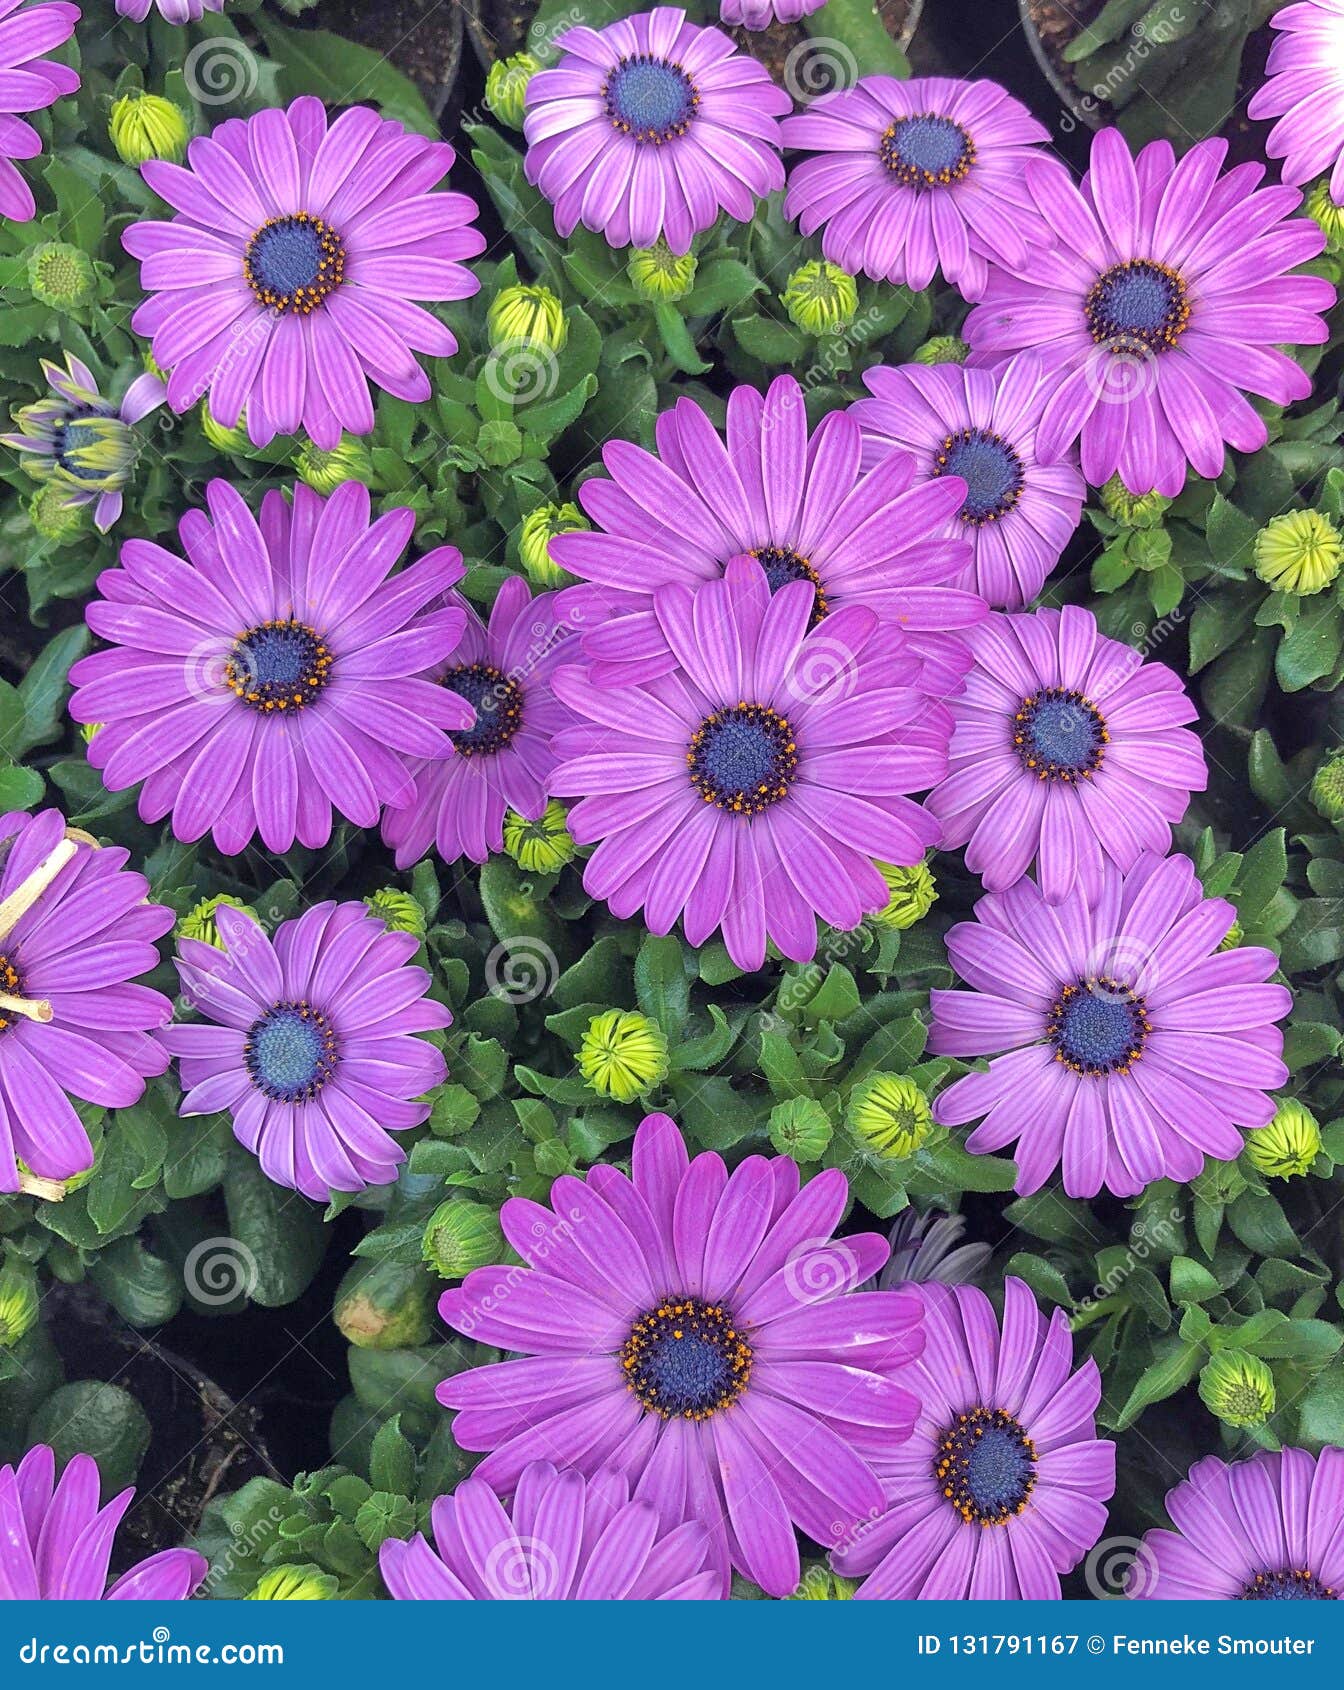 Violet Purple Cape Marguerite Daisy Flowers In Bloom Stock Image Image Of Flora Capitulum 131791167